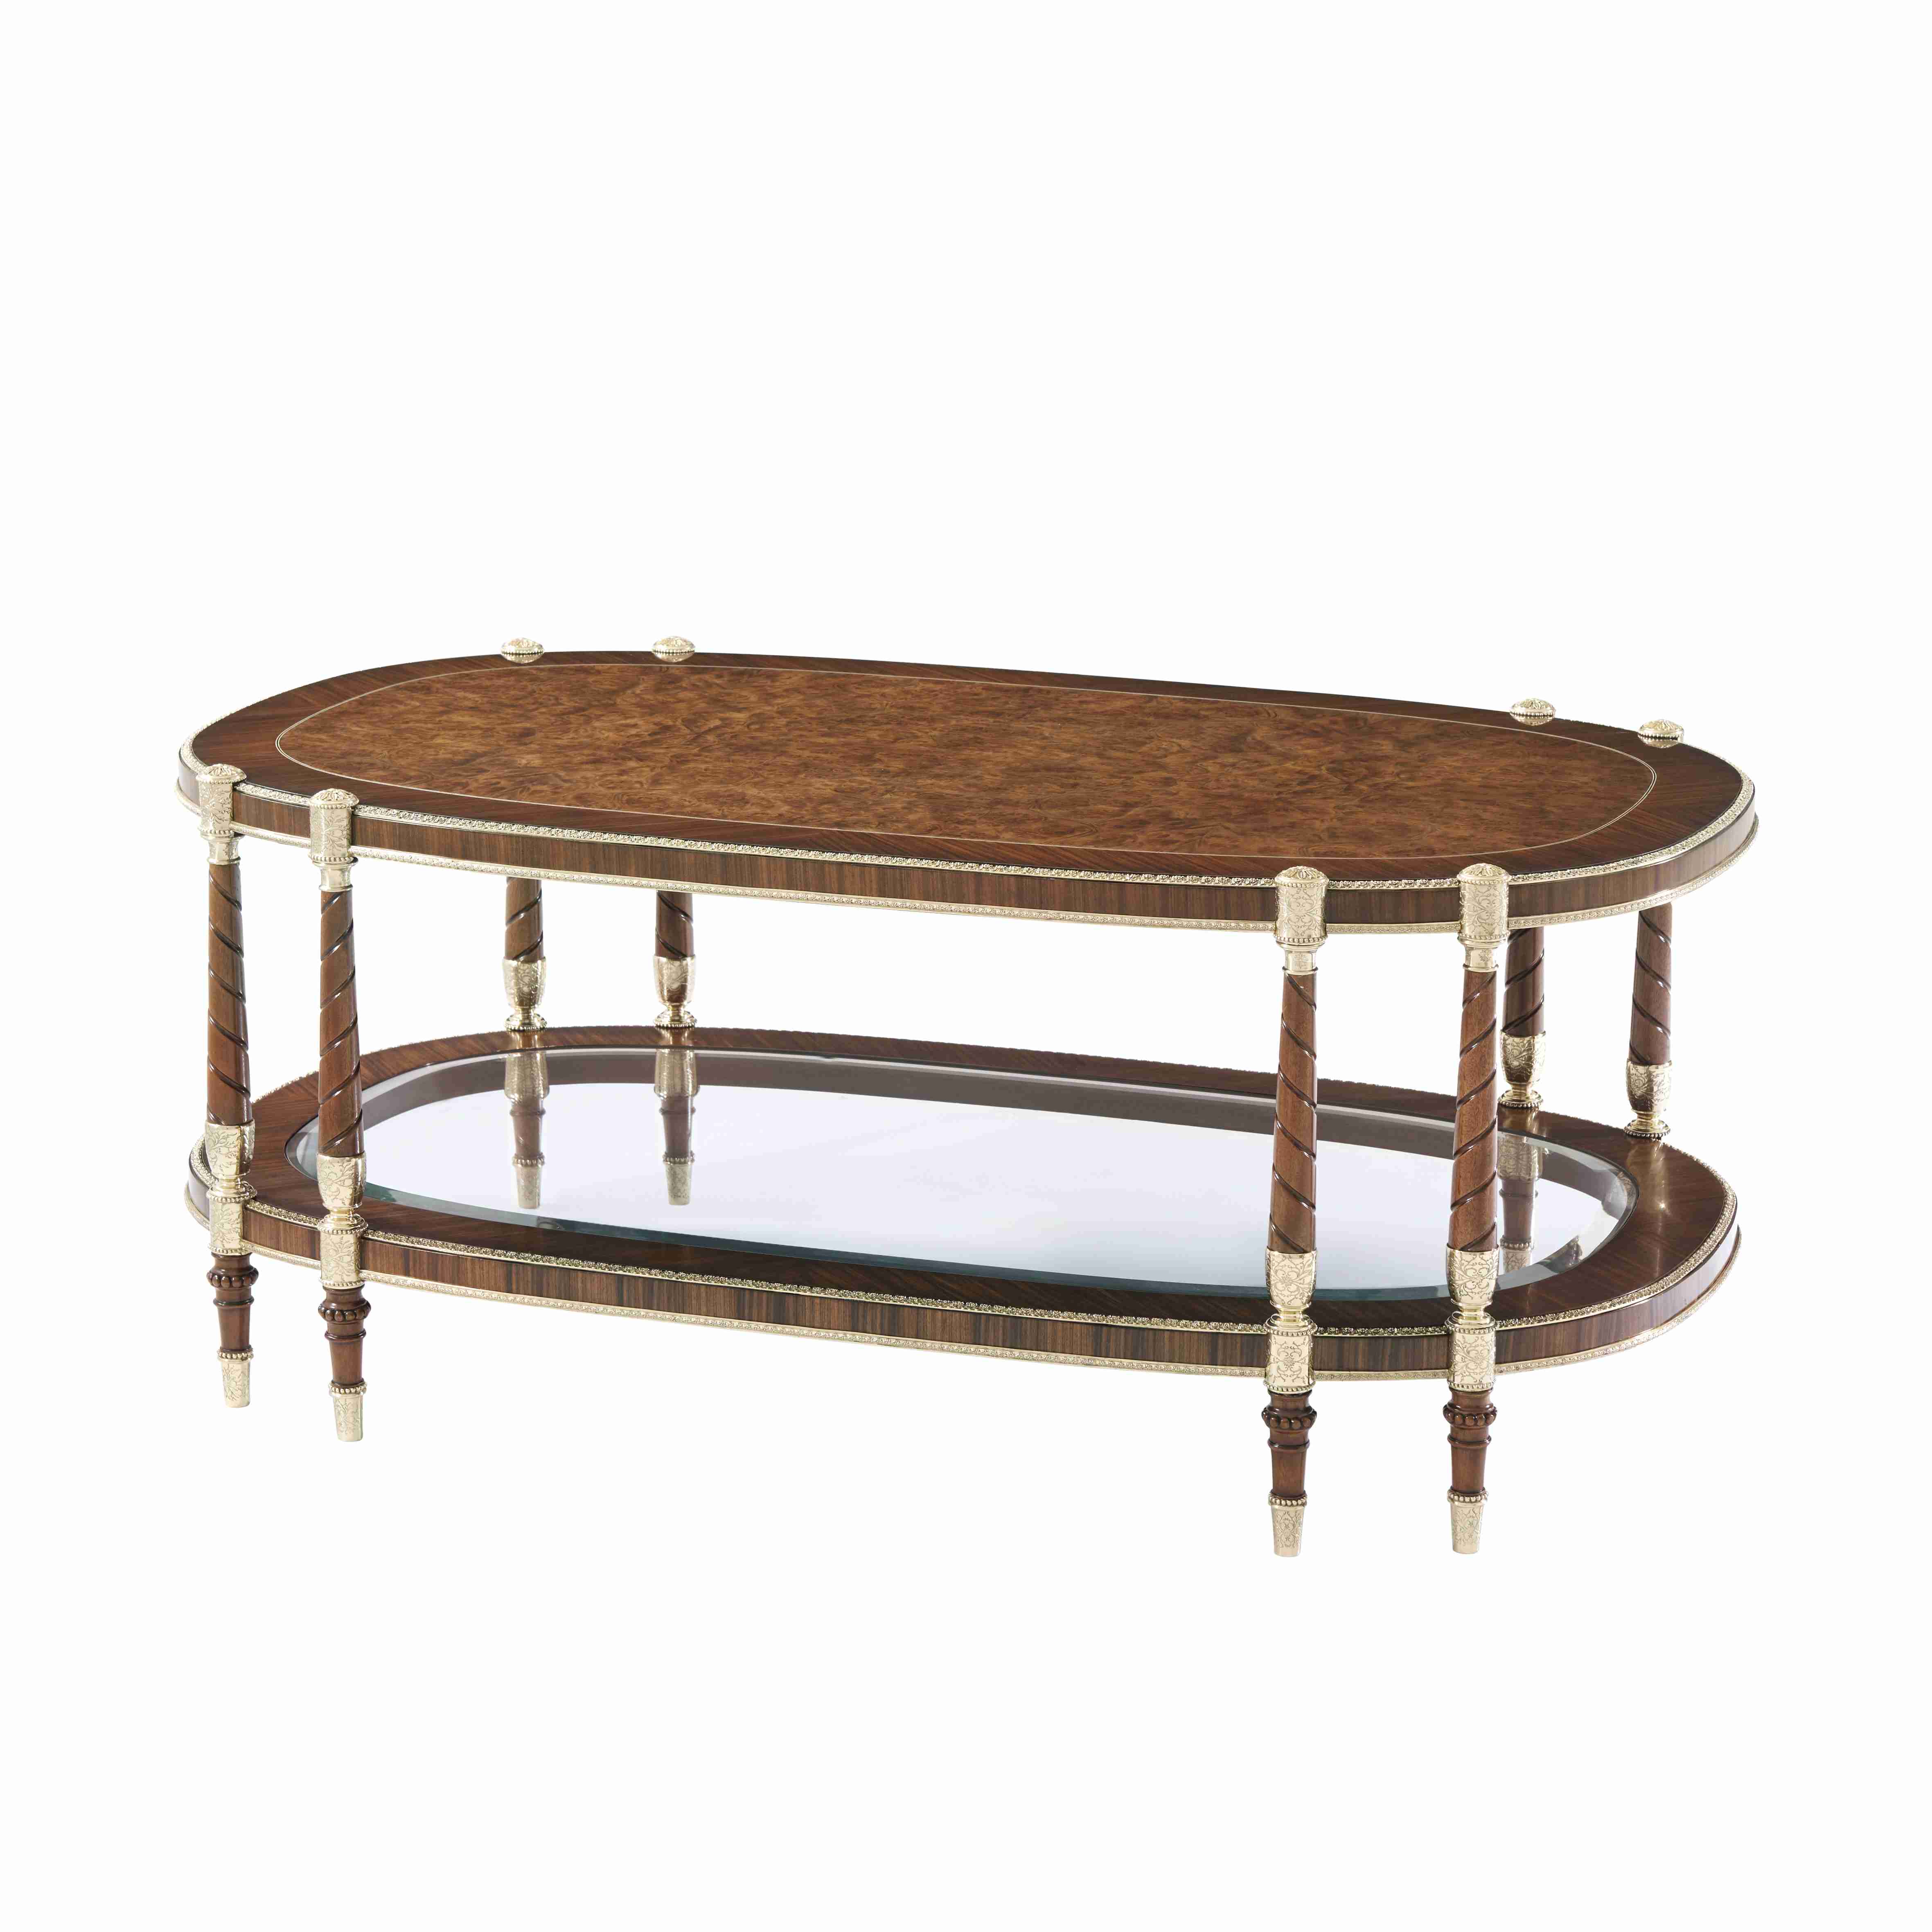 THE TIMOTHY COCKTAIL TABLE